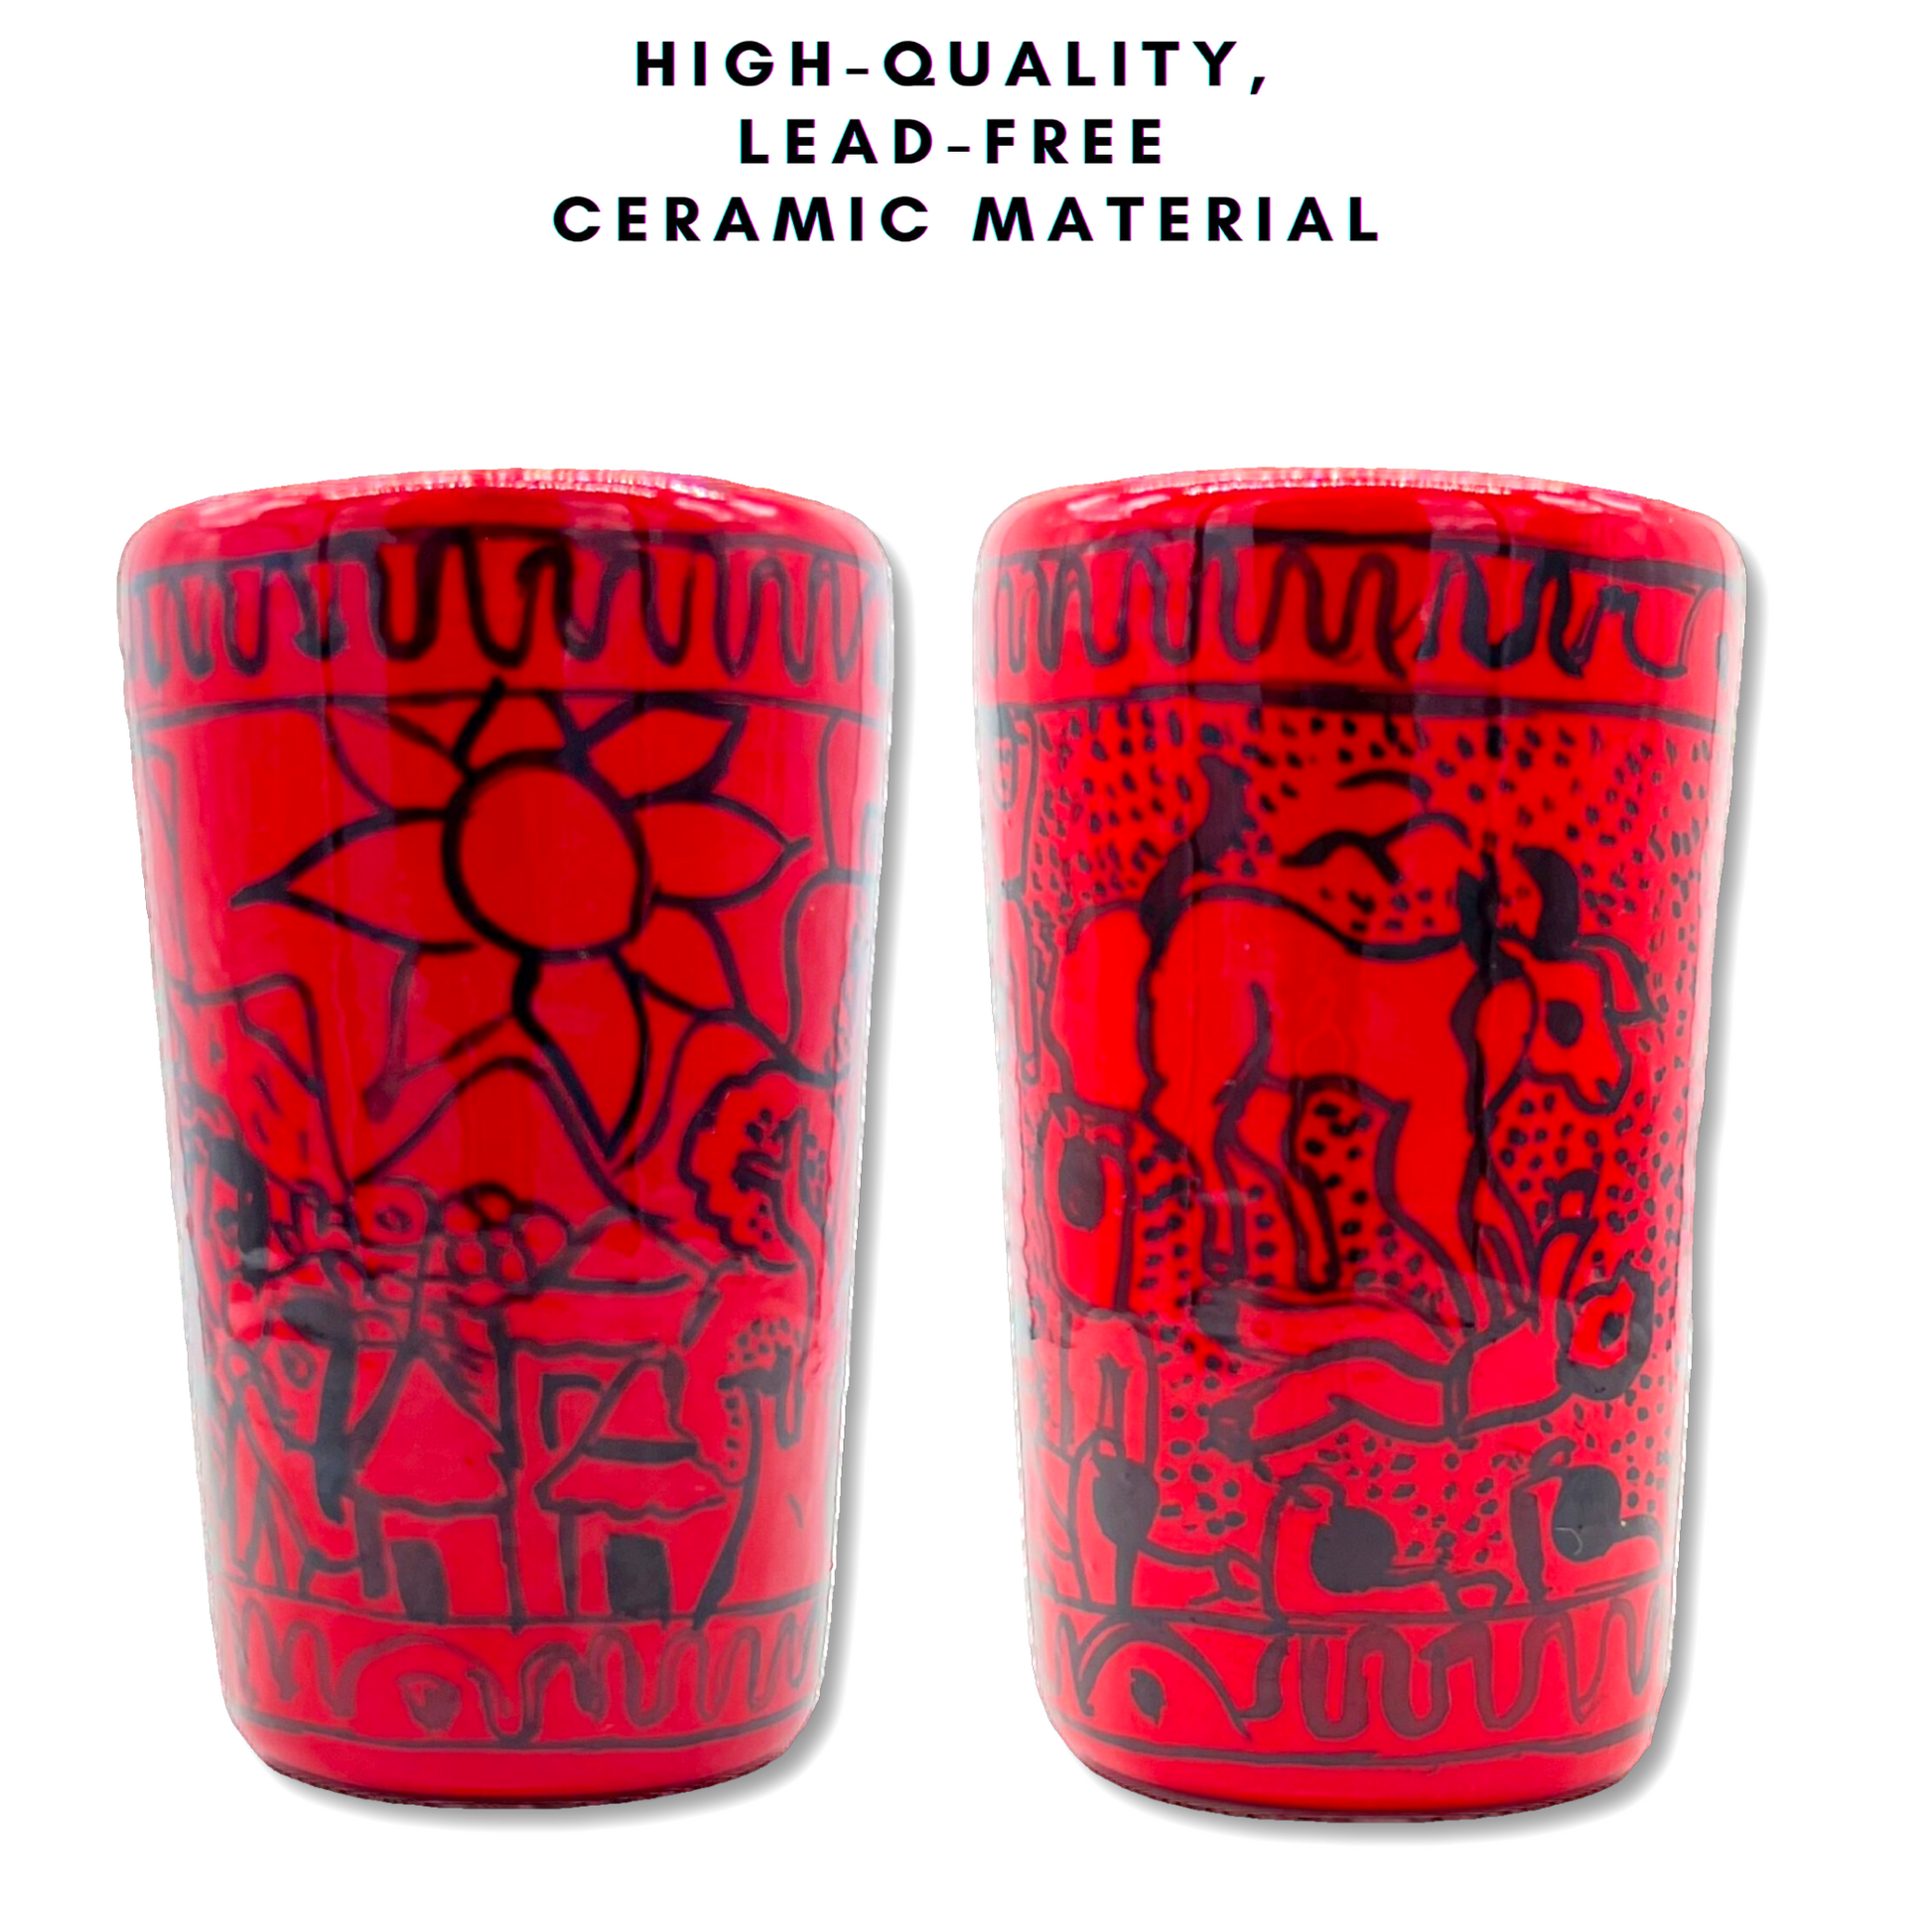 high quality lead free ceramic material red mexican shot glasses set of 2. handmade and handpainted in mexico